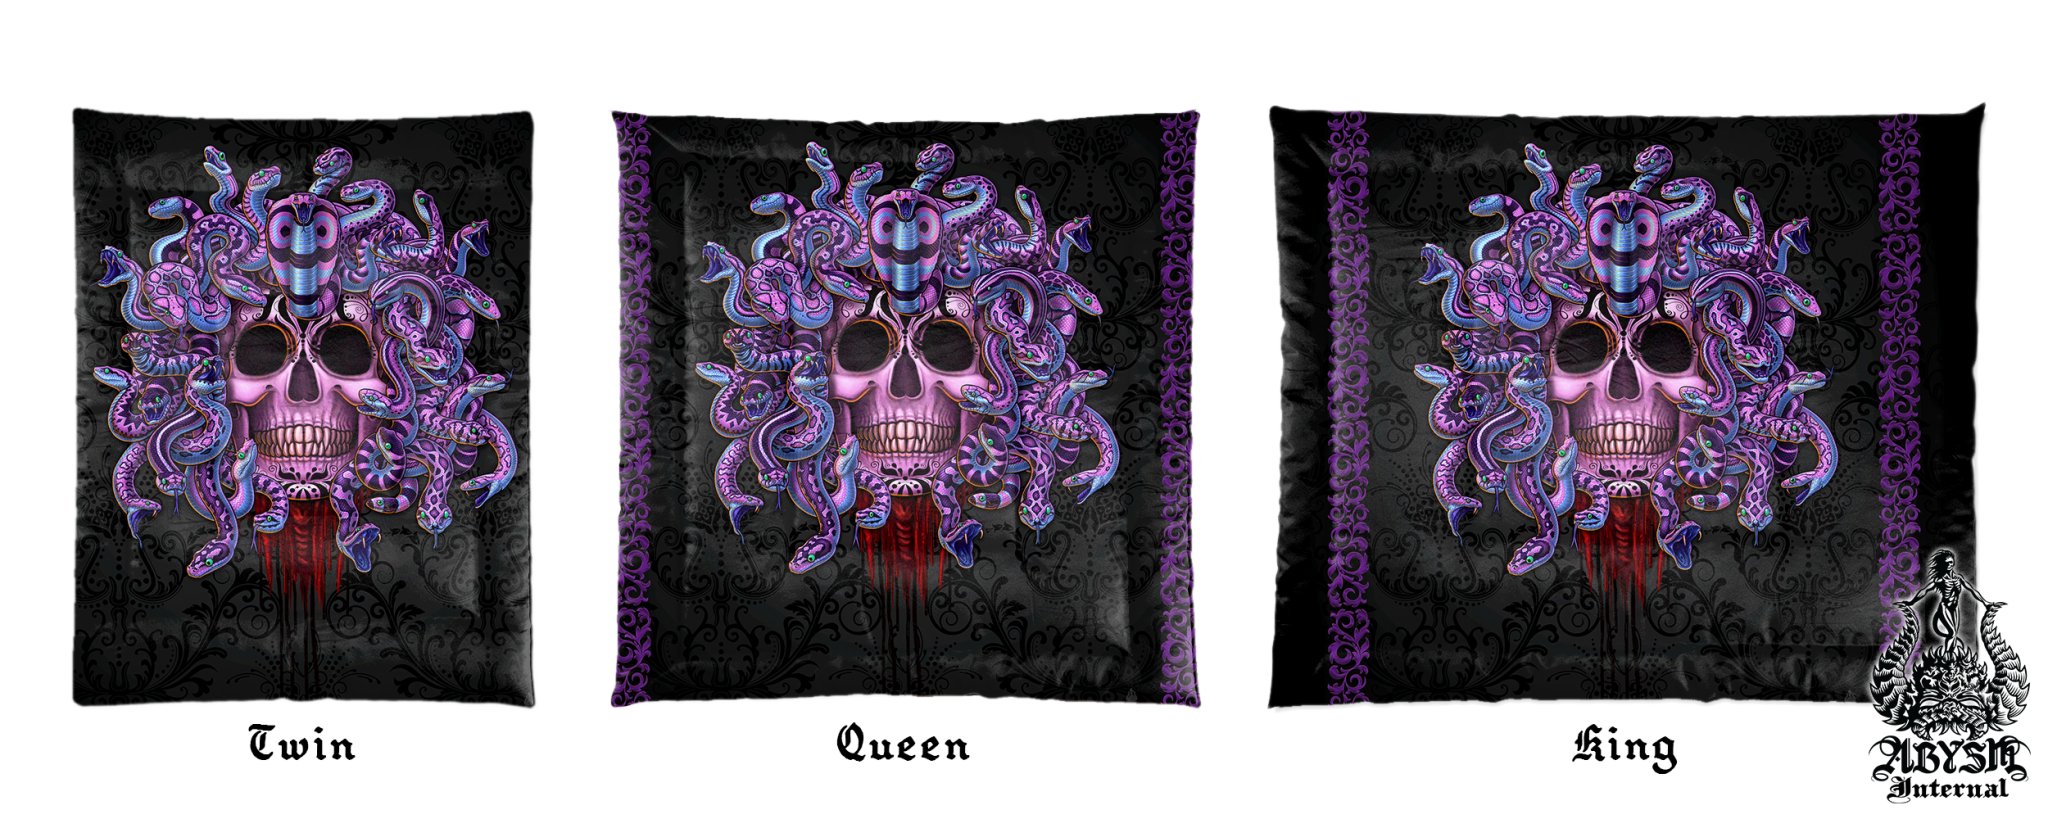 Whimsigoth Bedding Set, Comforter or Duvet, Gothic Bed Cover, Pastel Goth Bedroom Decor, King, Queen & Twin Size - Black and Purple Medusa, 2 Faces - Abysm Internal